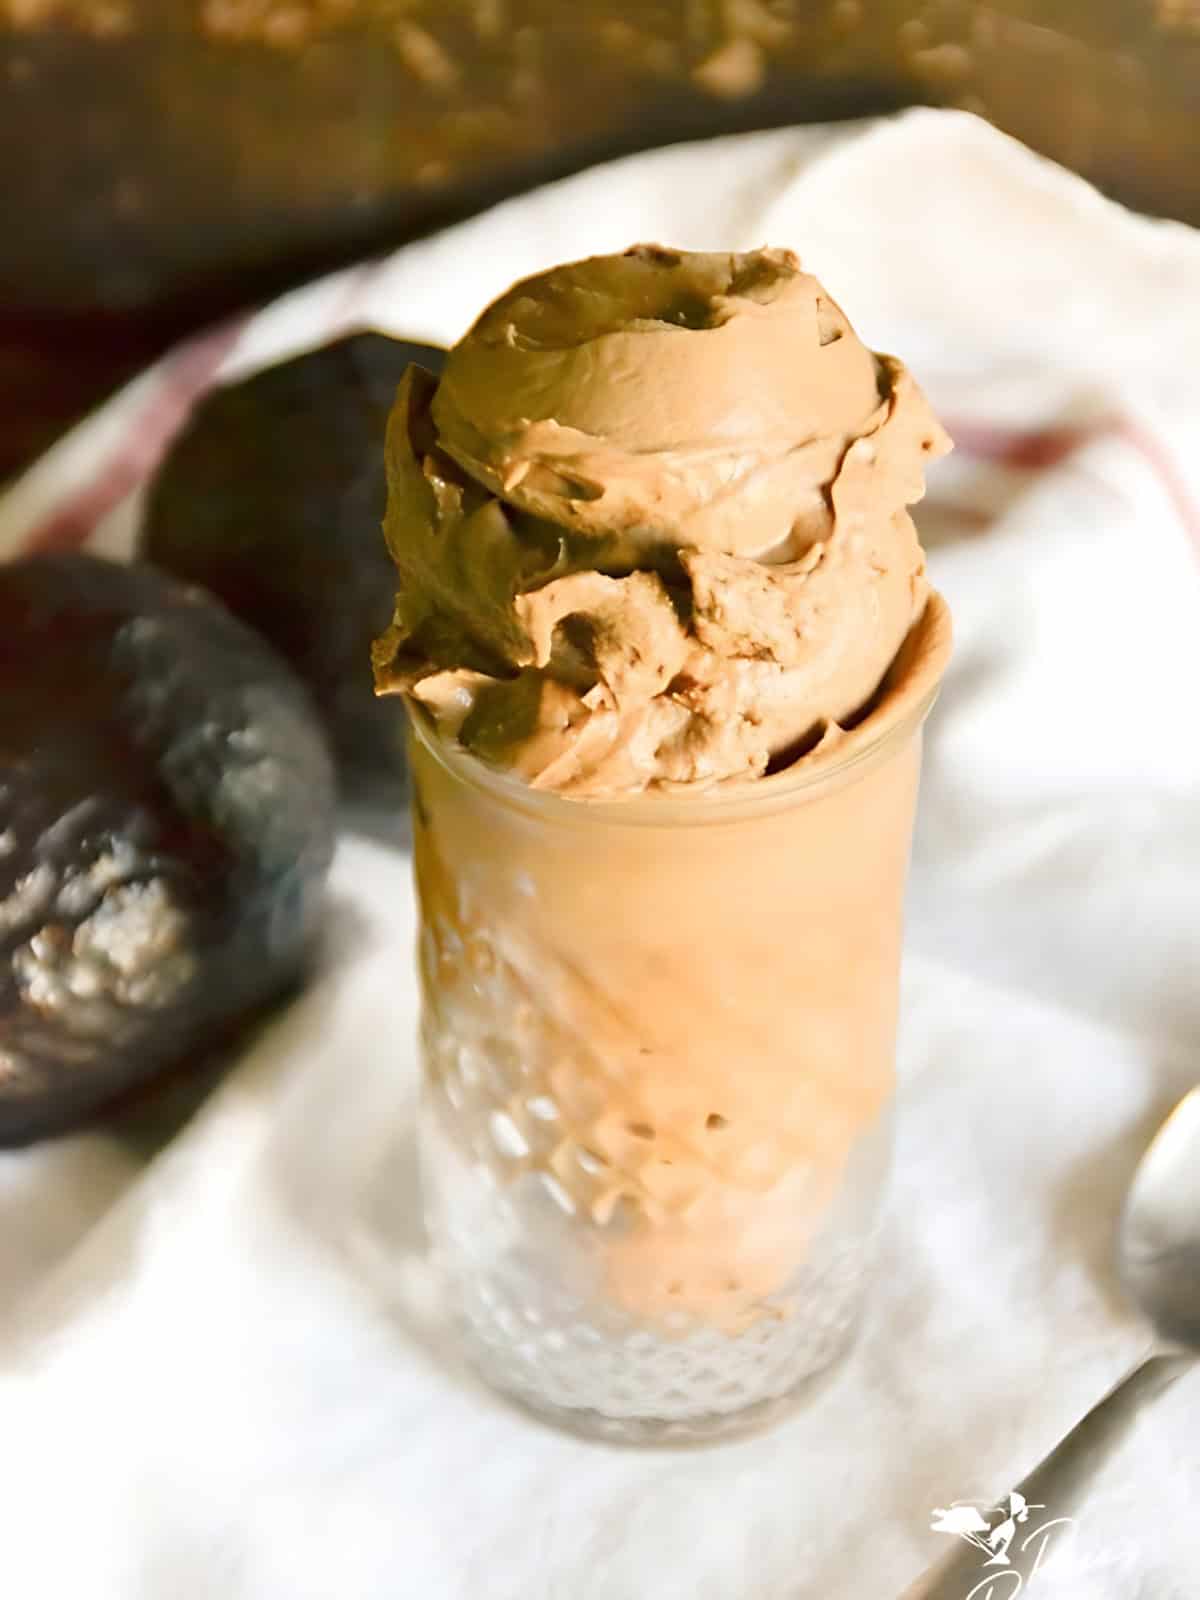 Scoops of chocolate avocado ice cream in a glass.